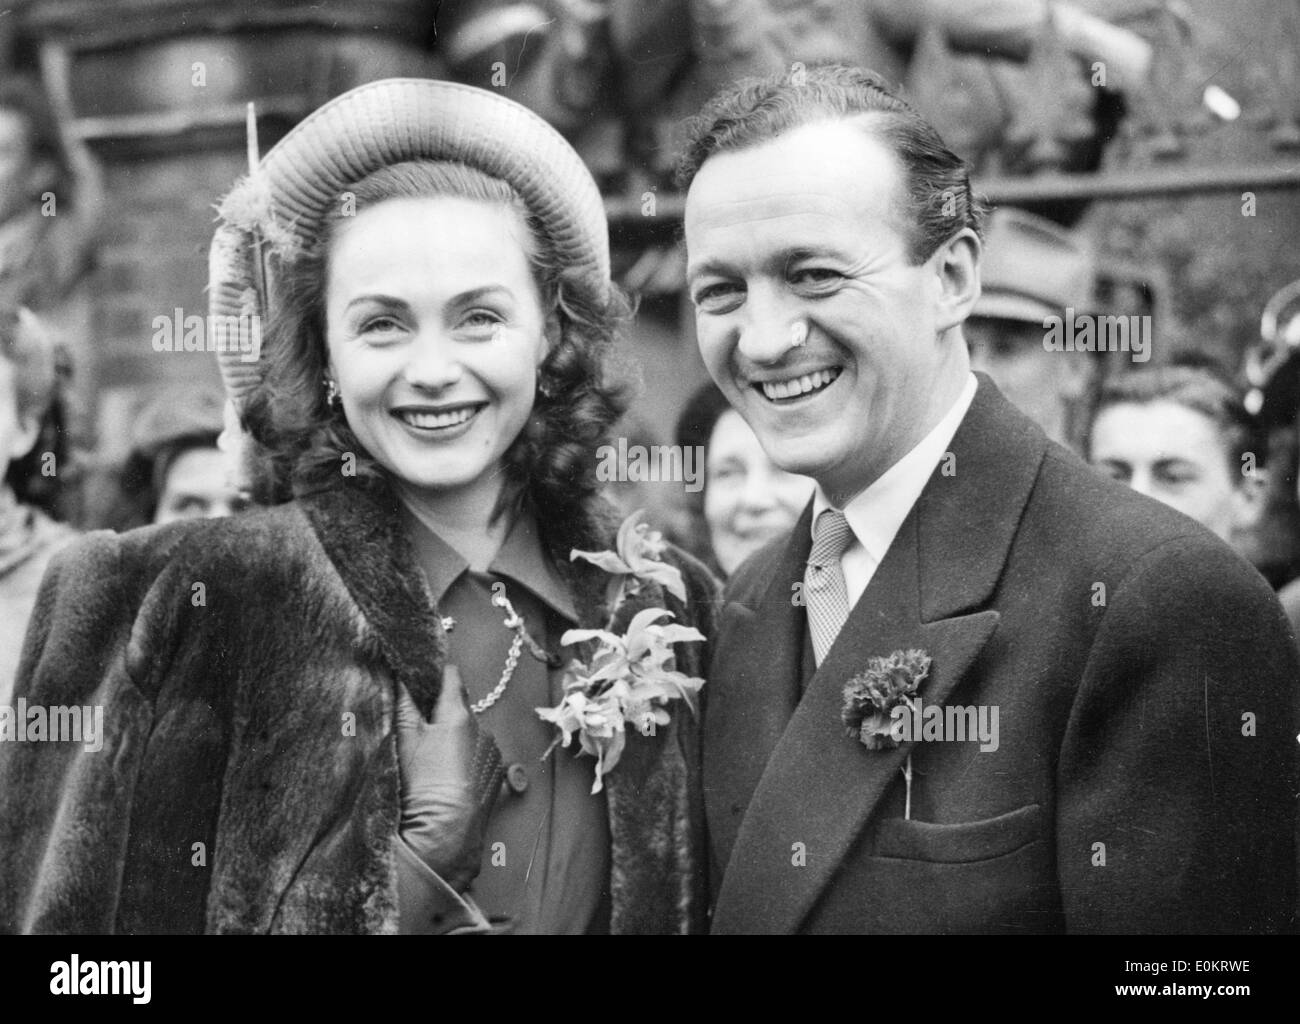 Actor David Niven and Hjordis Tersmeden on their wedding day Stock Photo